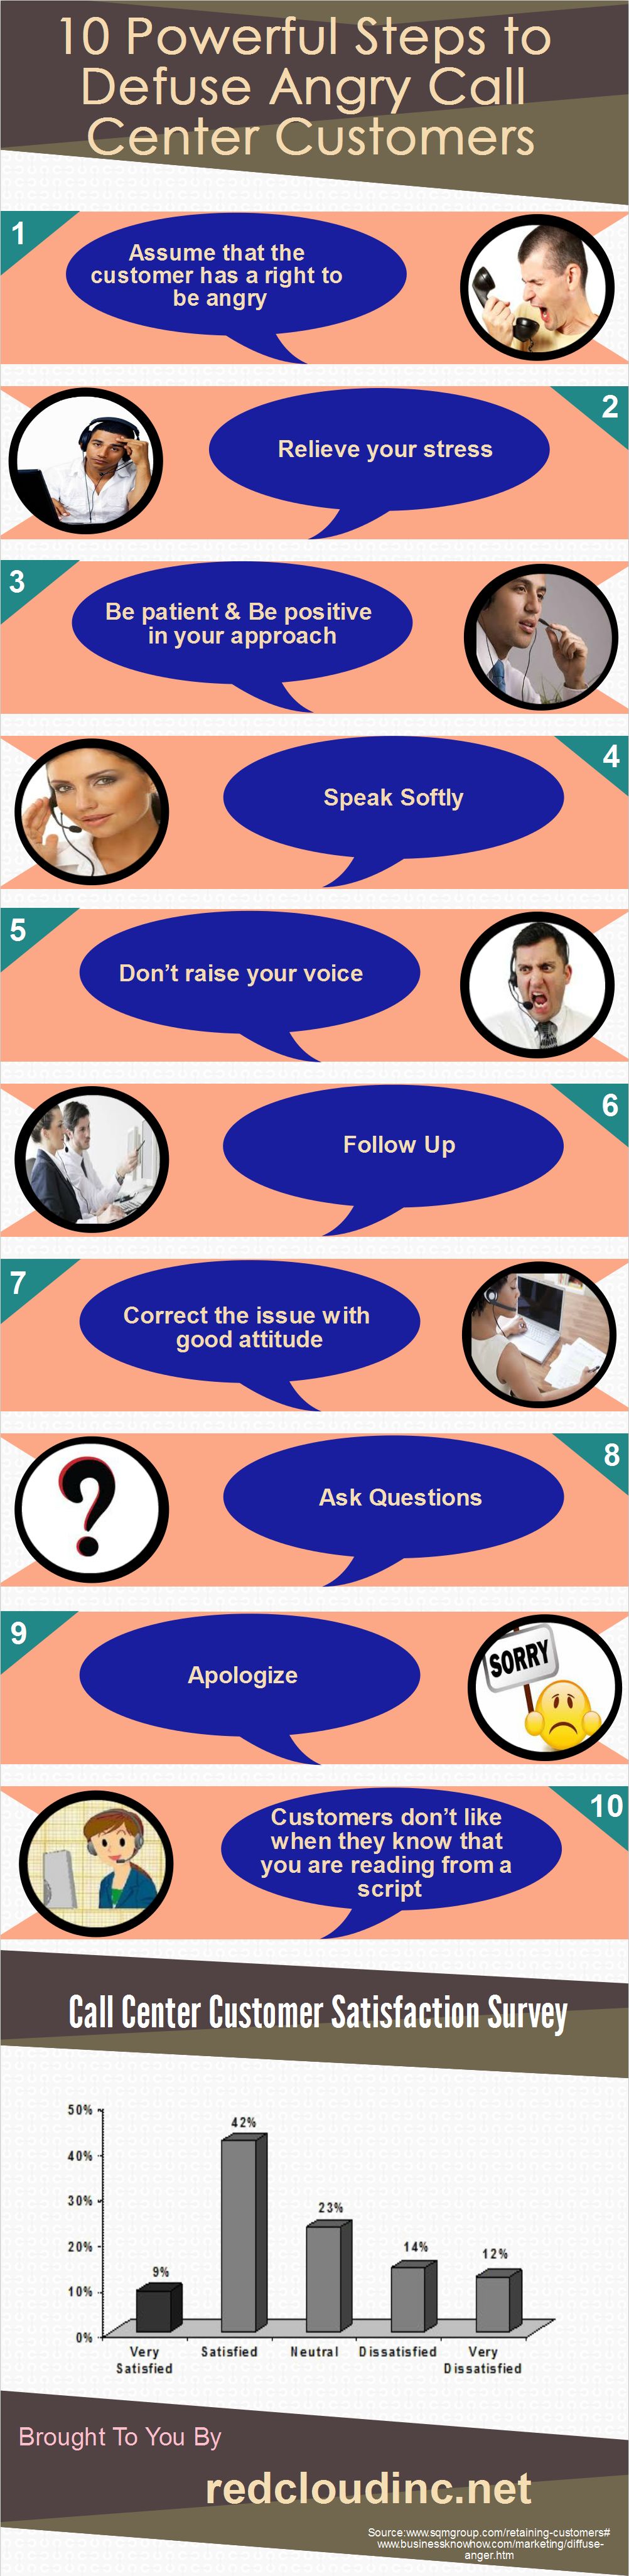 10 Powerful Steps To Defuse Angry Call Center Customers Visually 8274